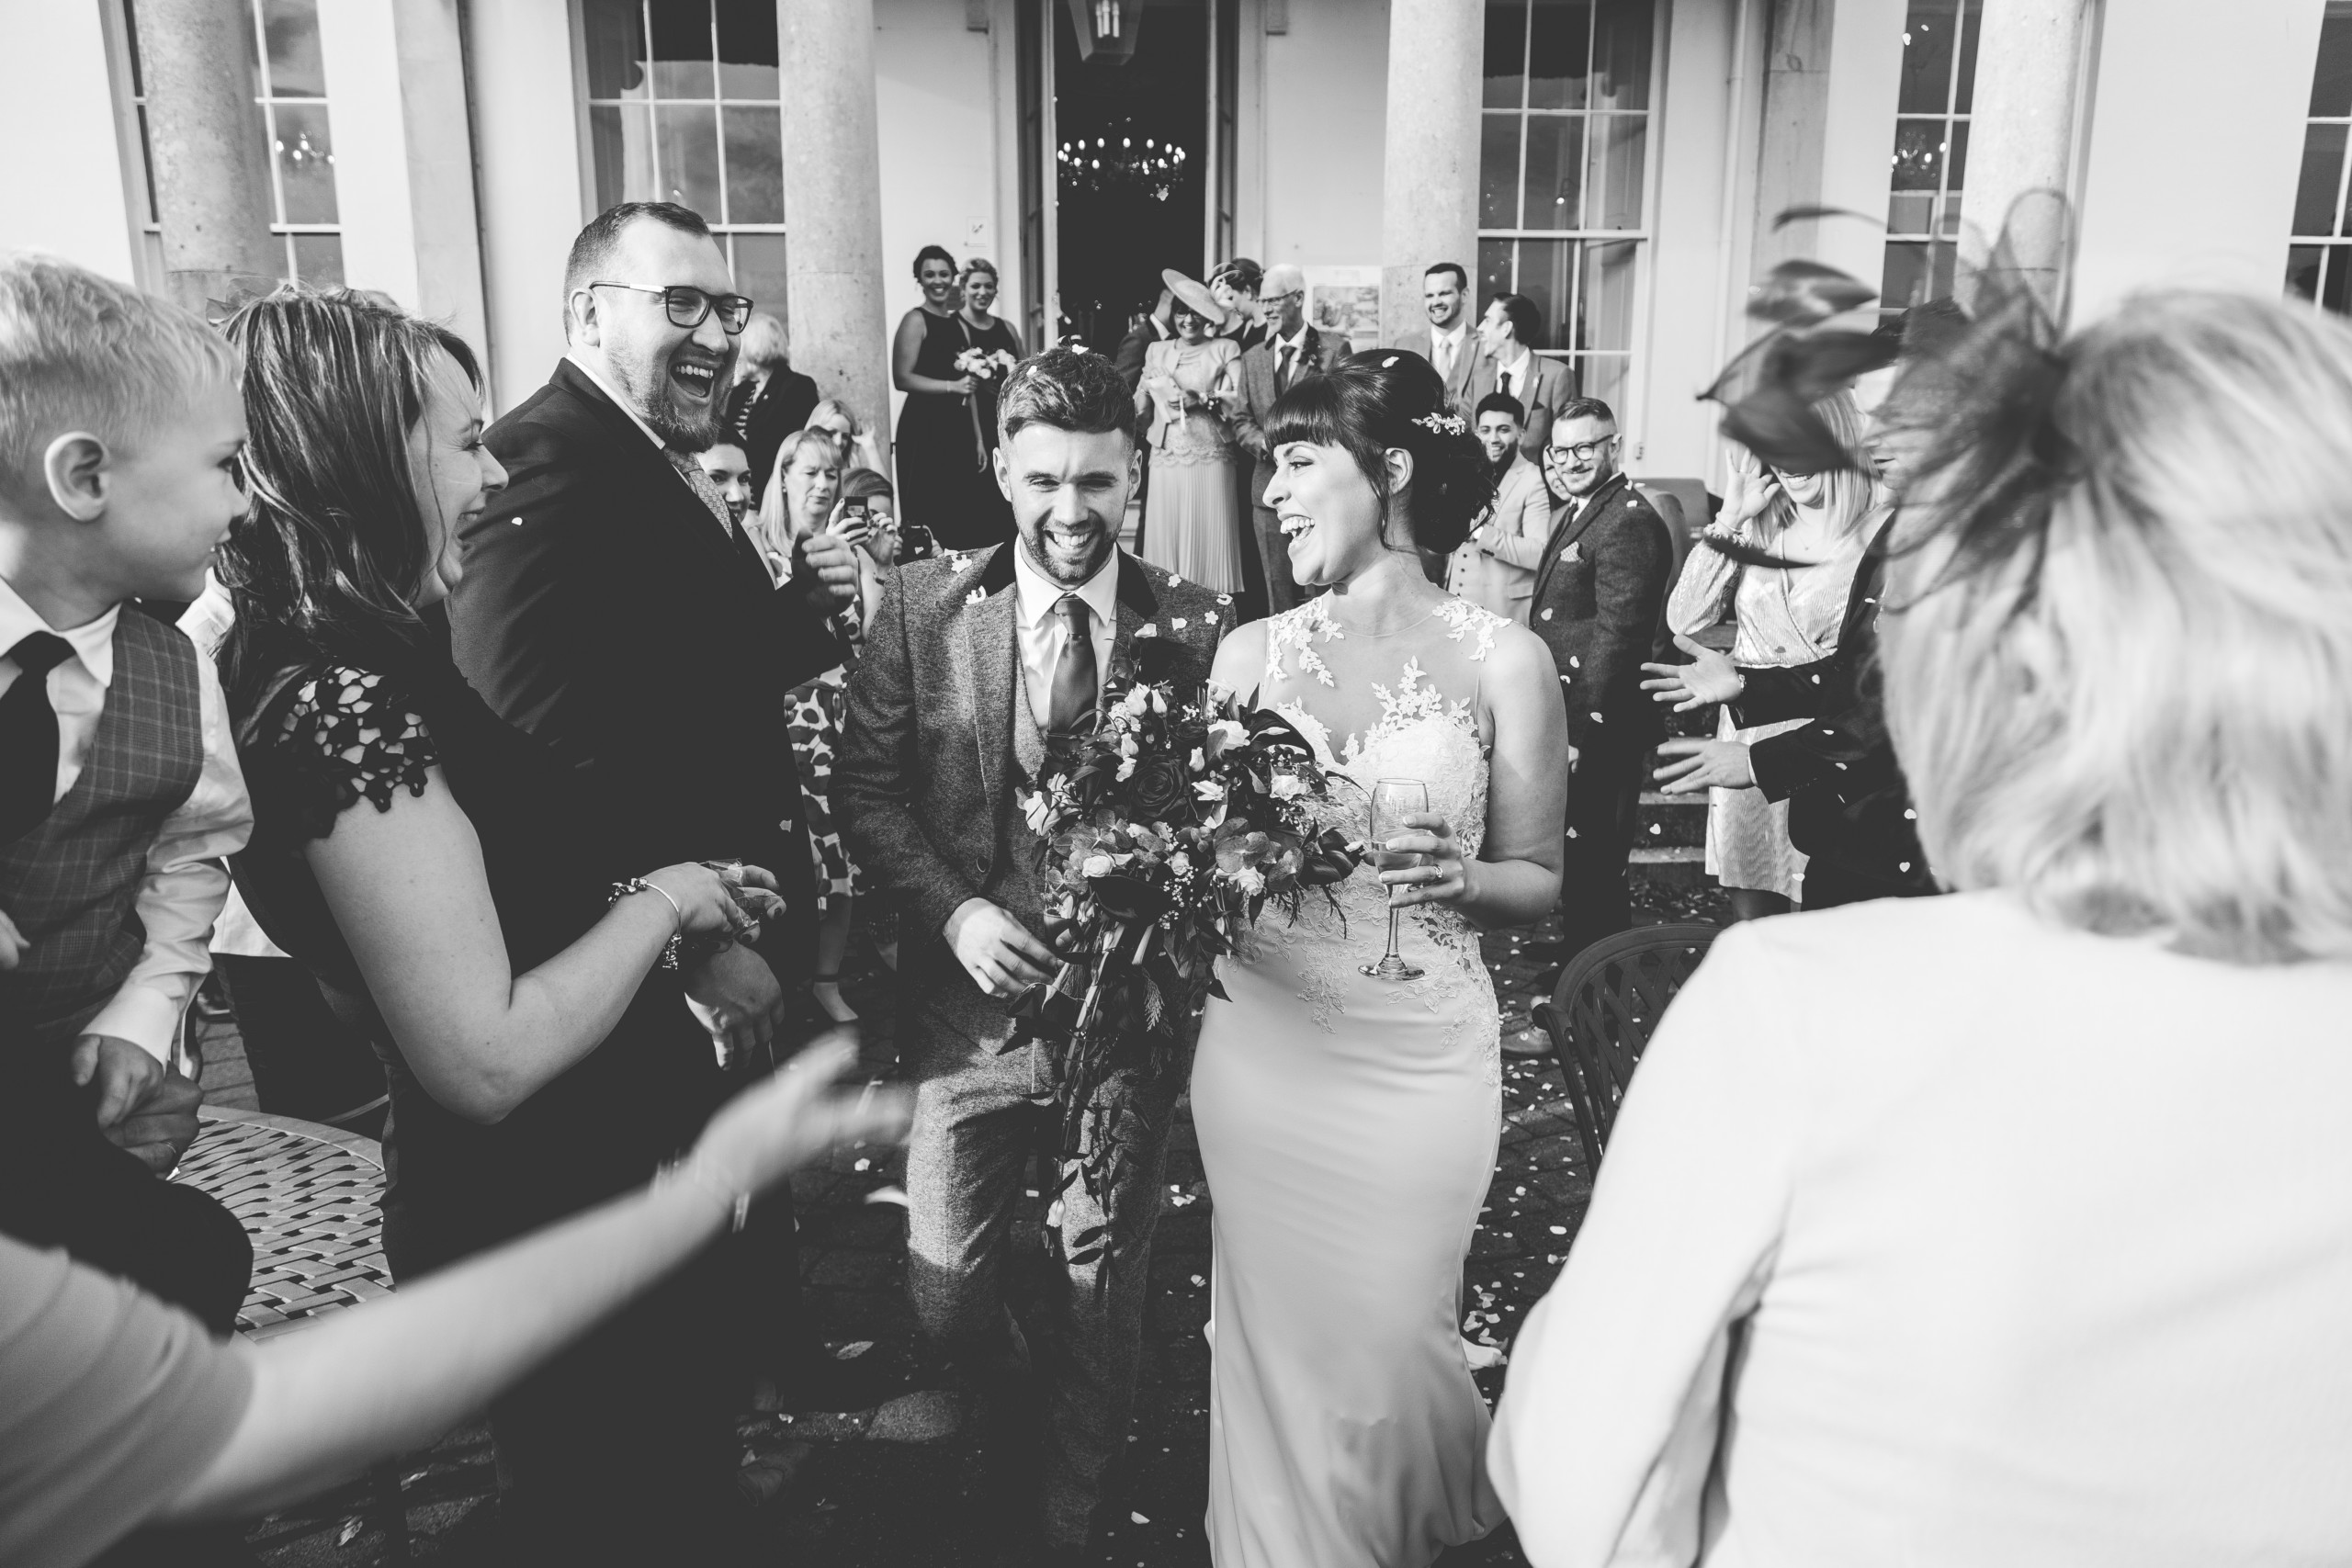 weddings exeter, exeter wedding venues, exeter golf and country club, places to get married in exeter, best wedding venue exeter, large room for wedding exeter,